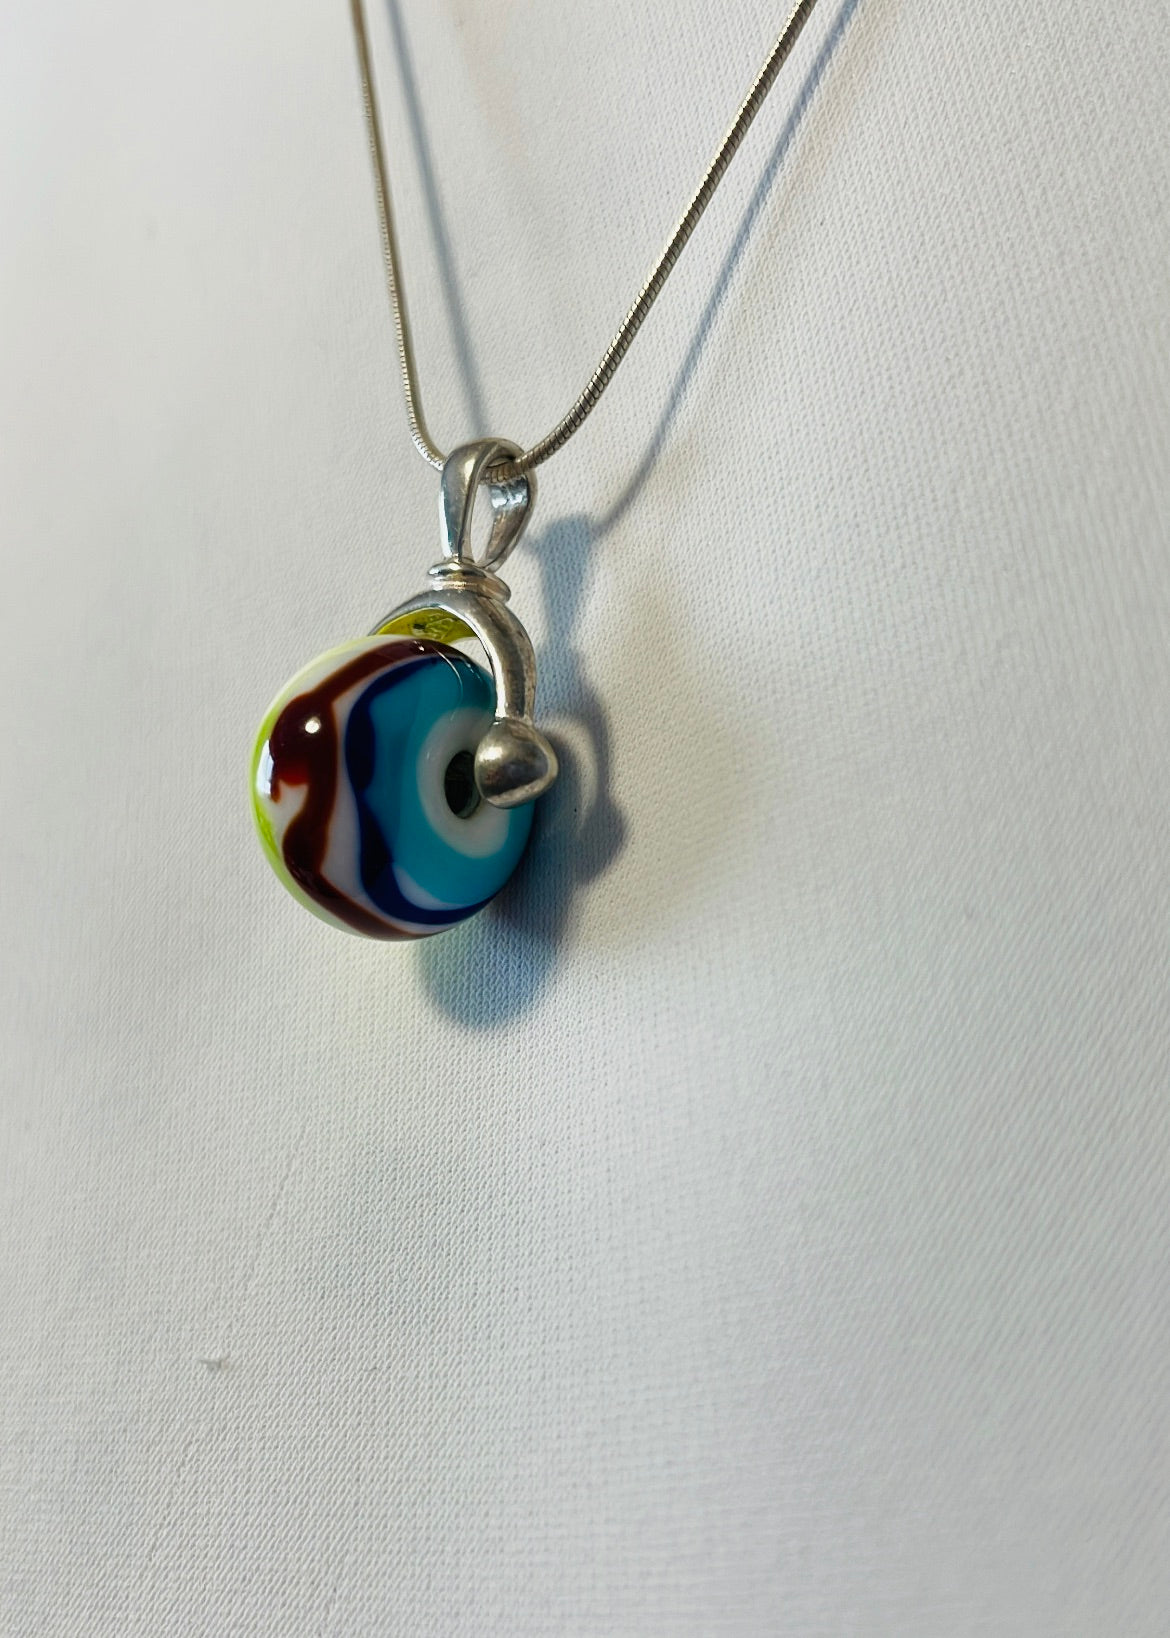 The Blown Glass Necklaces